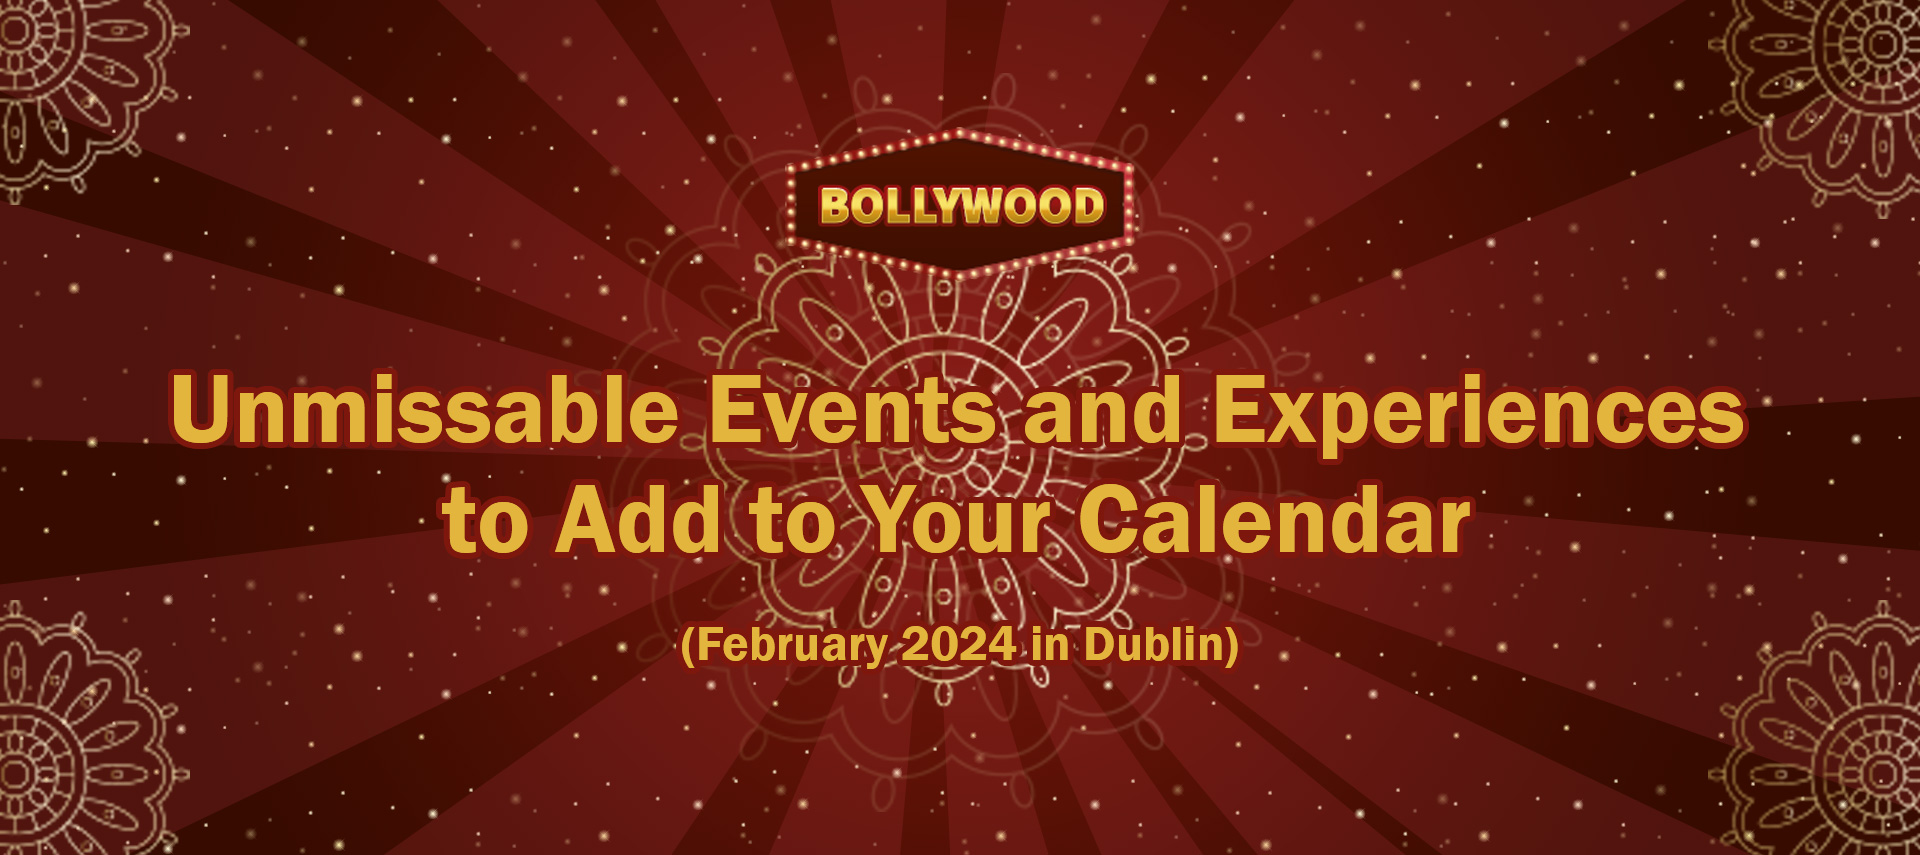 February 2024 in Dublin: Unmissable Events and Experiences to Add to Your Calendar